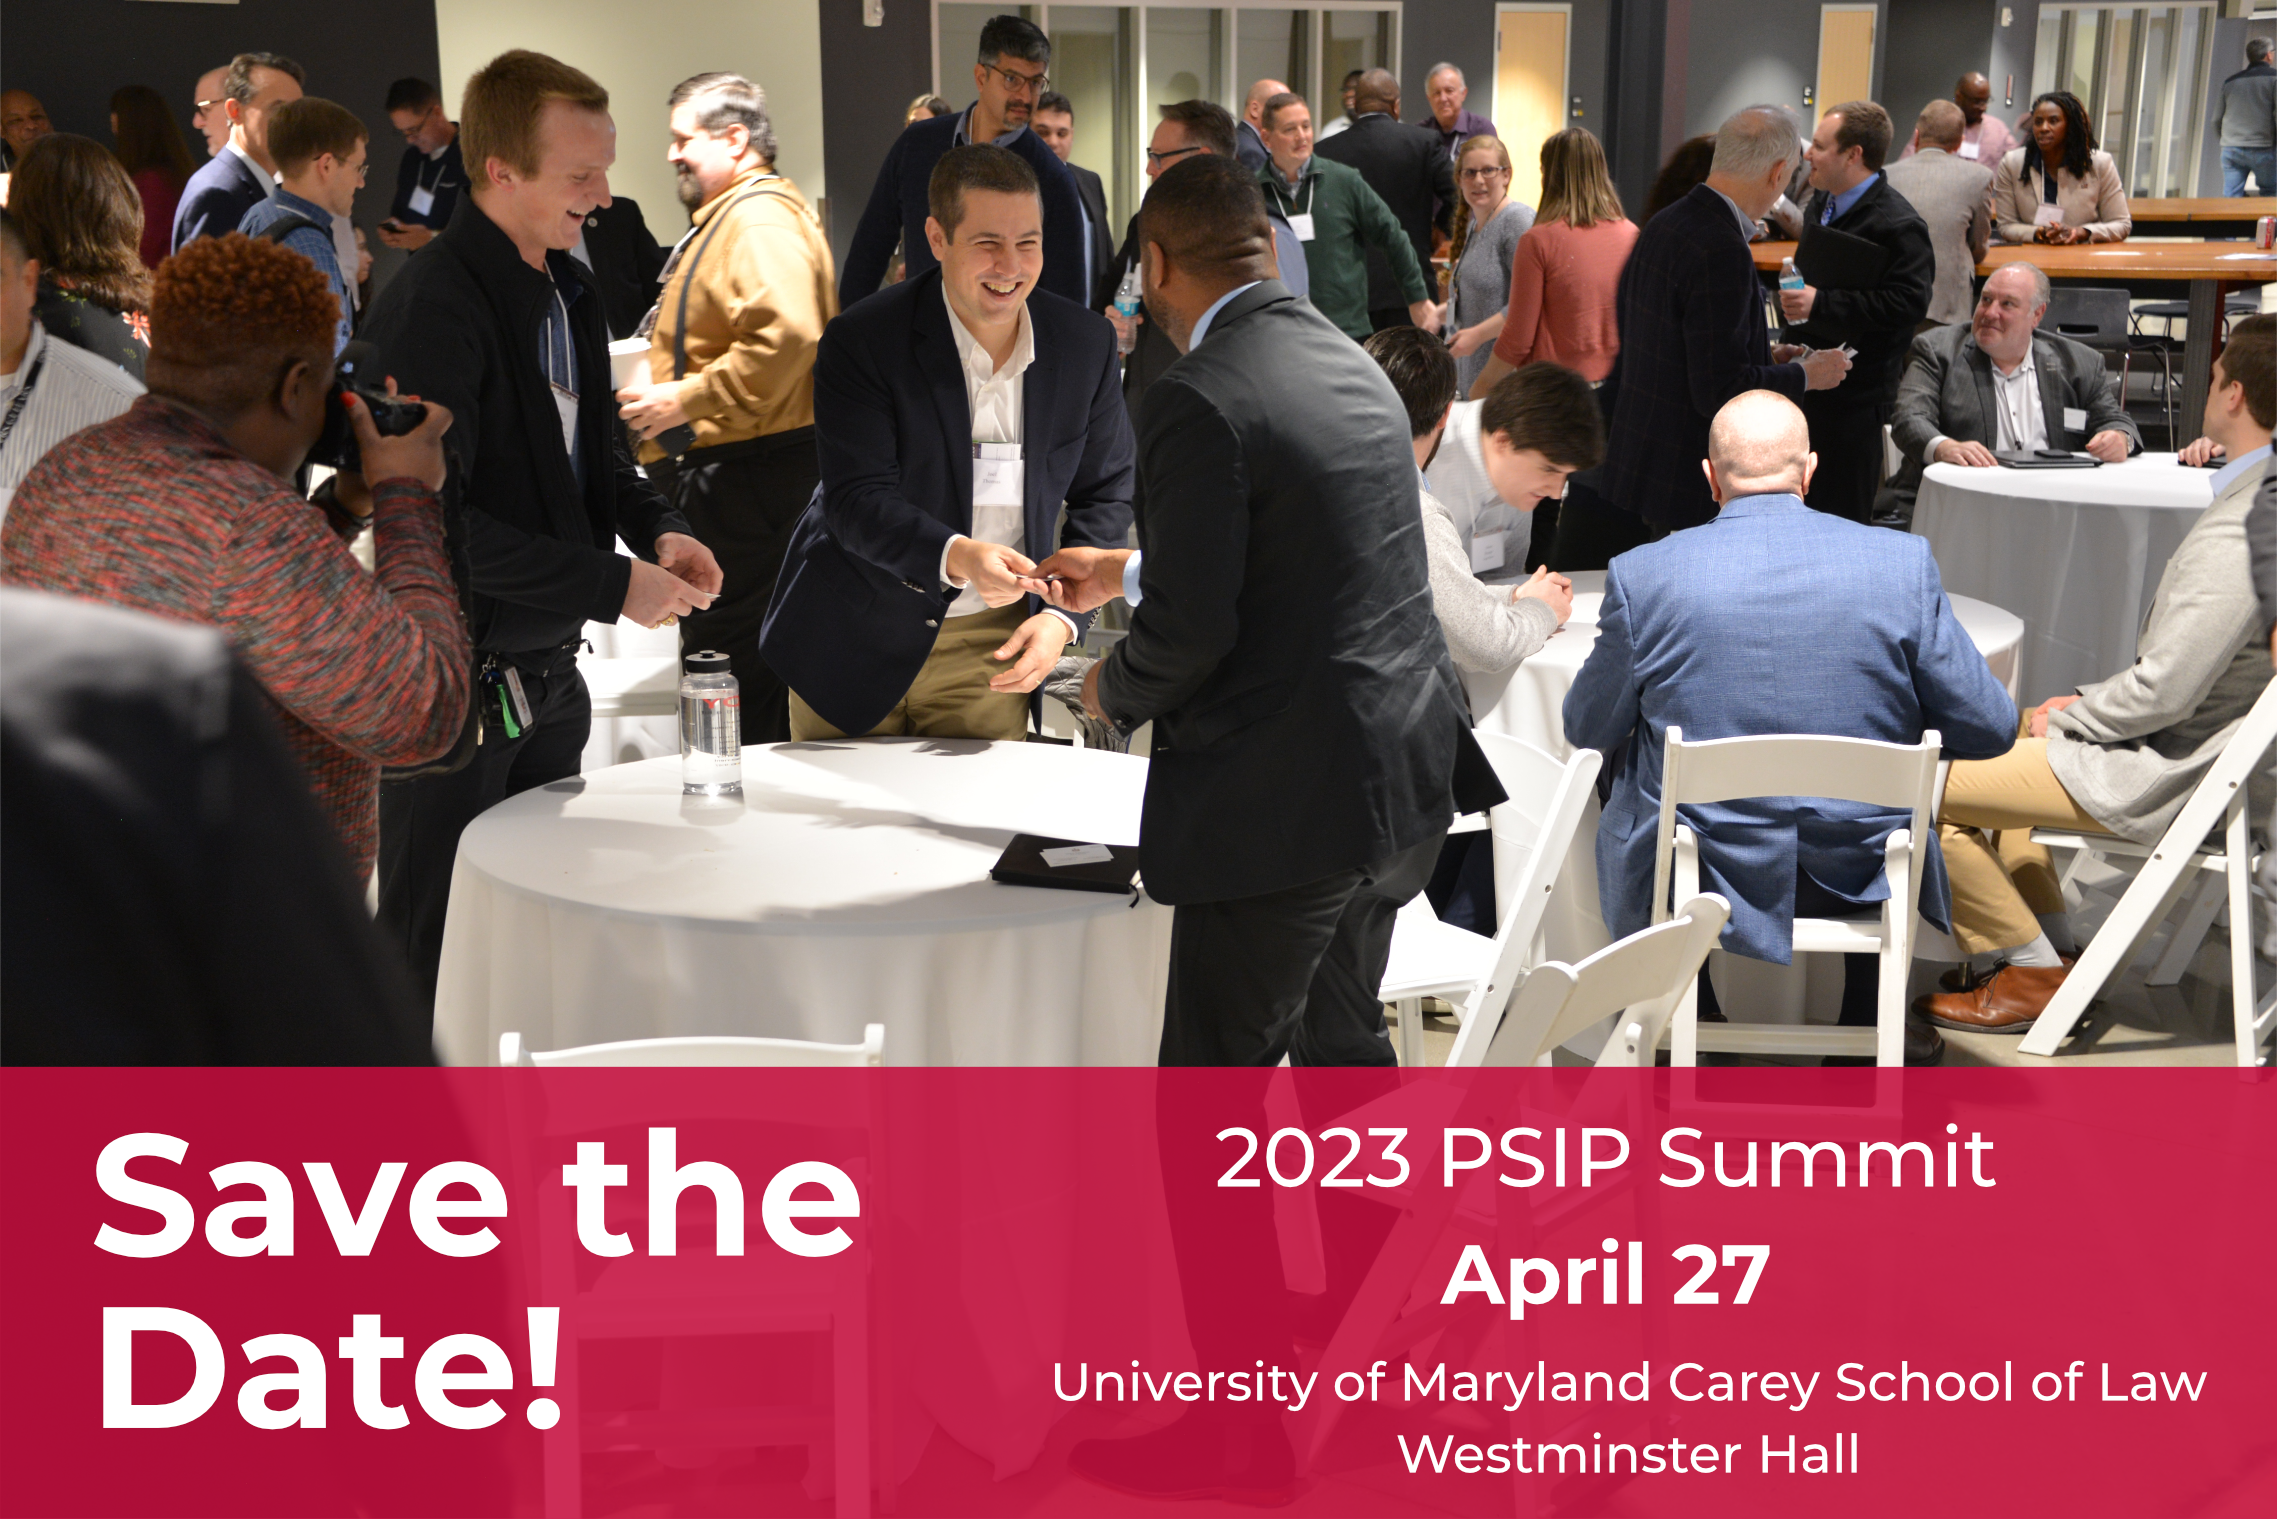 Save the date! The 2023 PSIP Summit will be held on April 27 at the University of Maryland Carey School of Law's Westminster